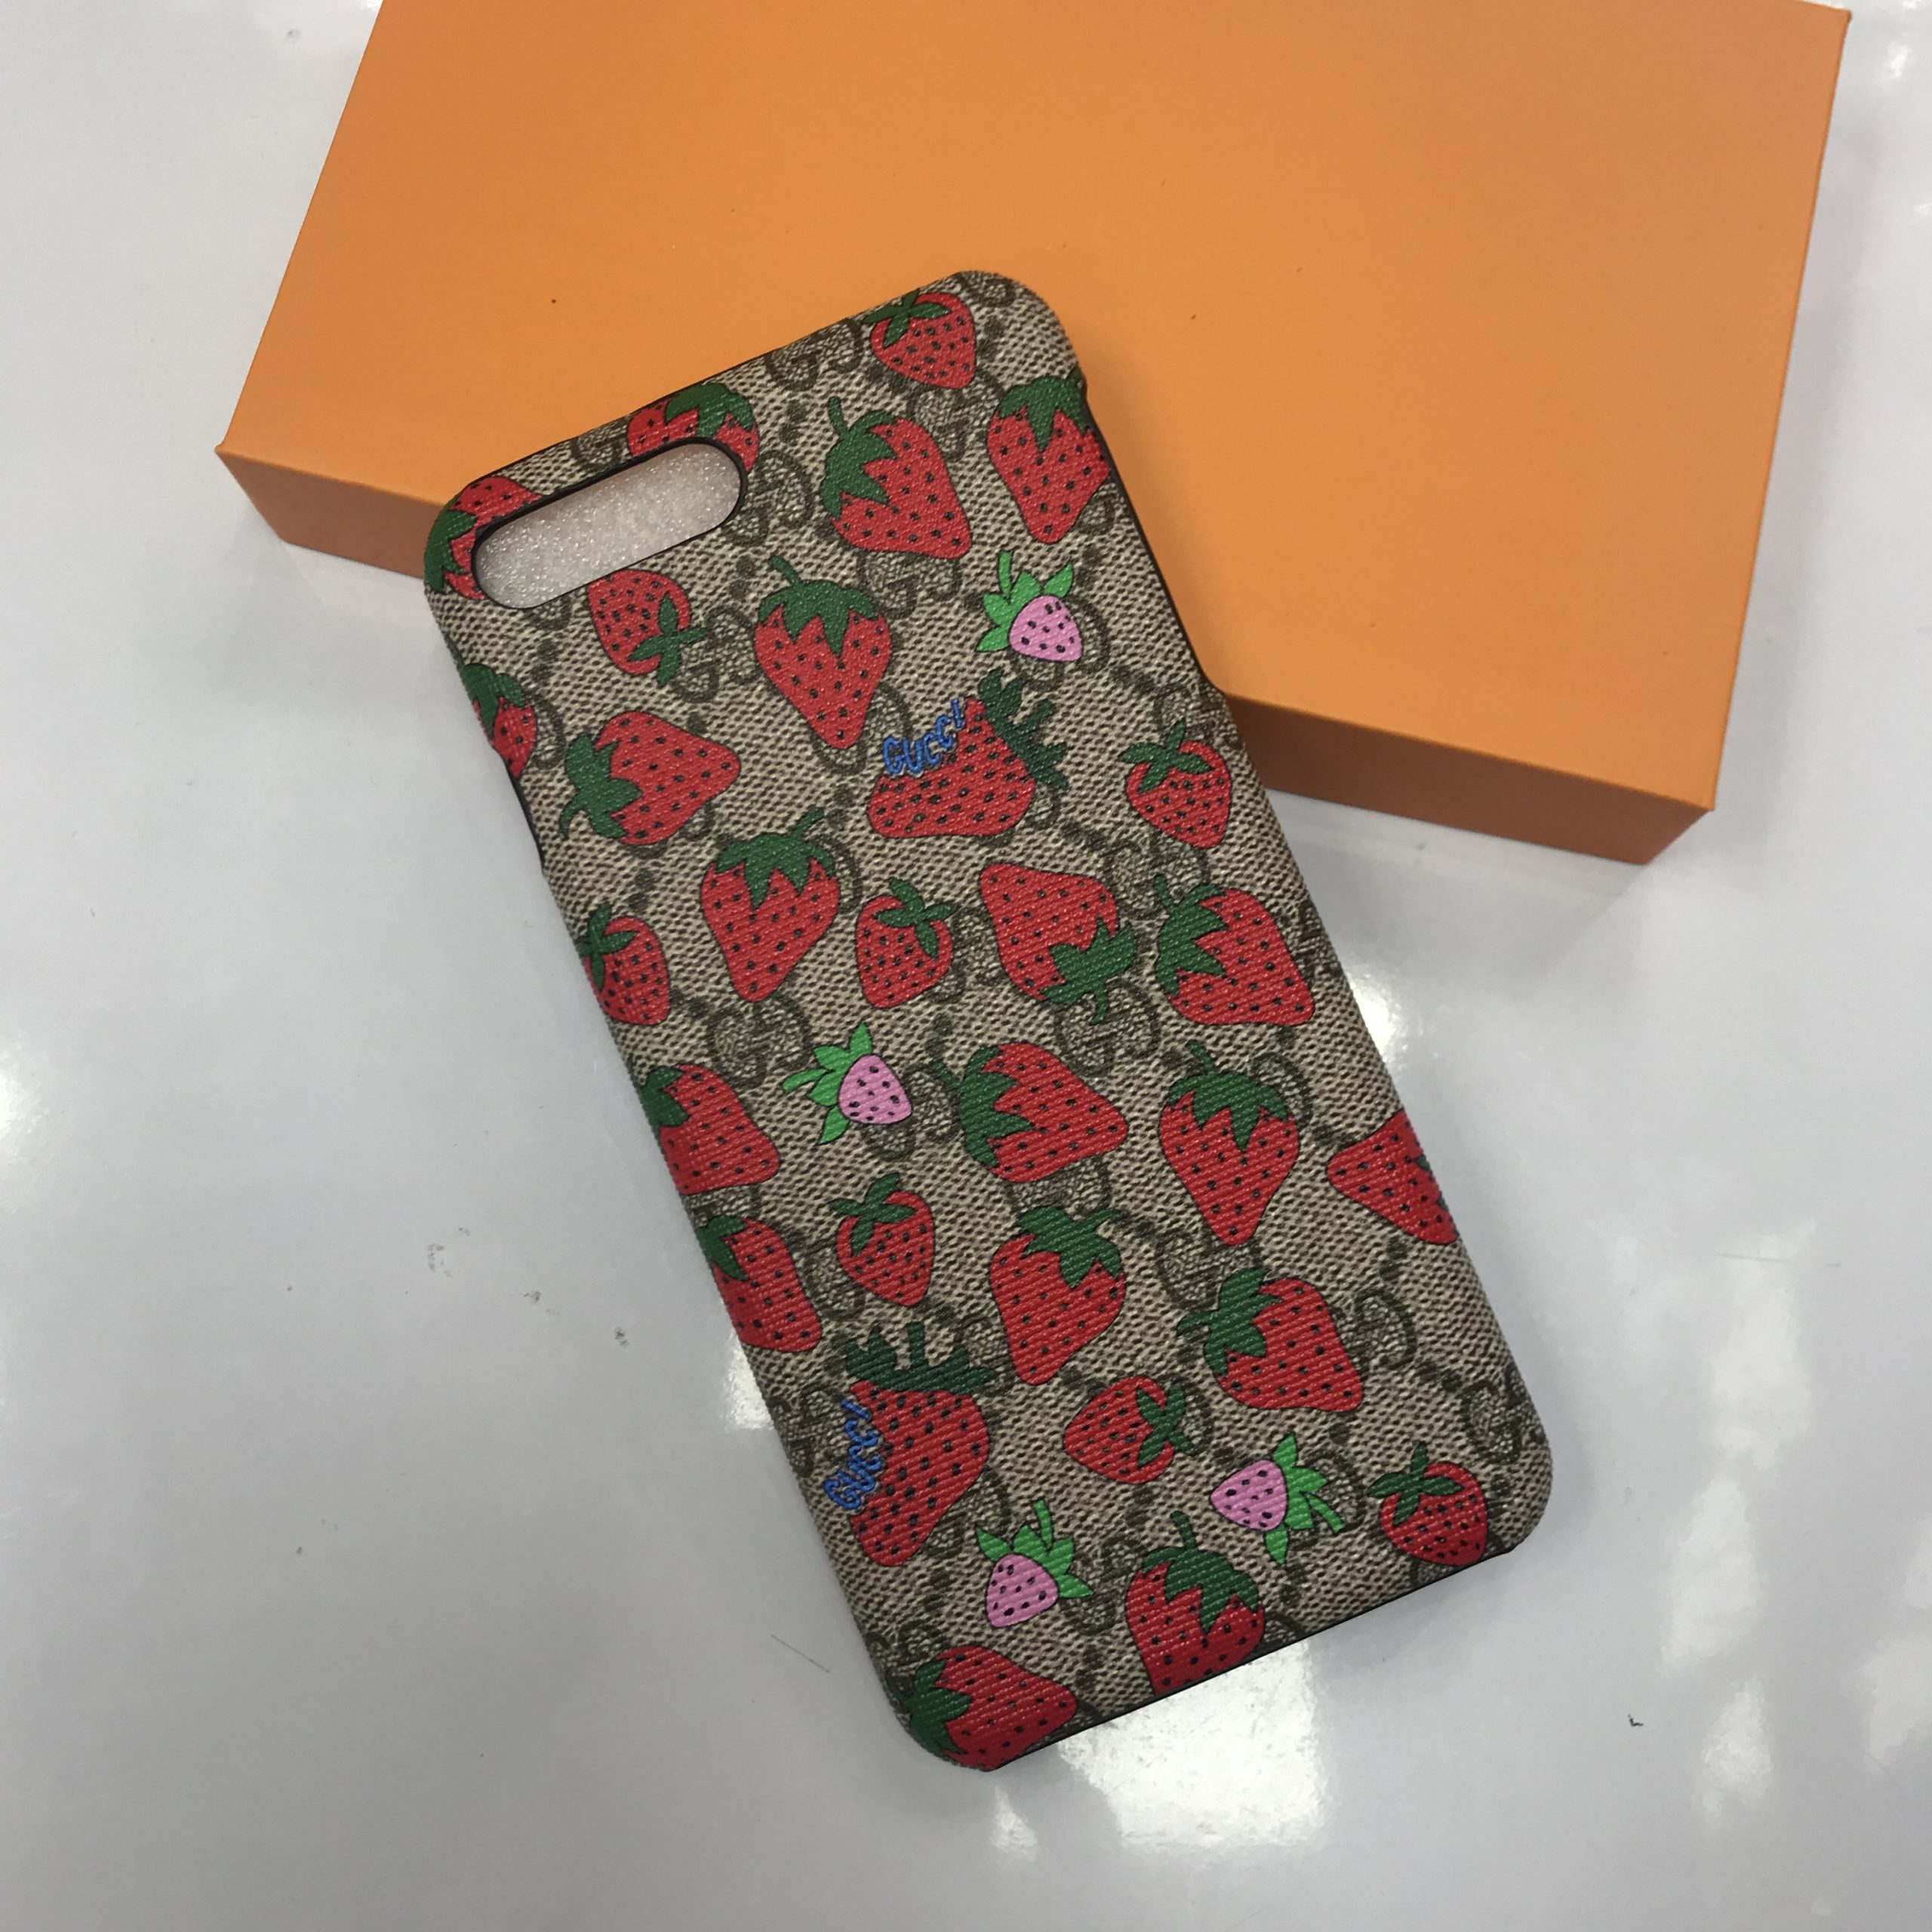 Strawberry Gucci Iphone Cases Covers For Iphone 11 Xr Xs Max